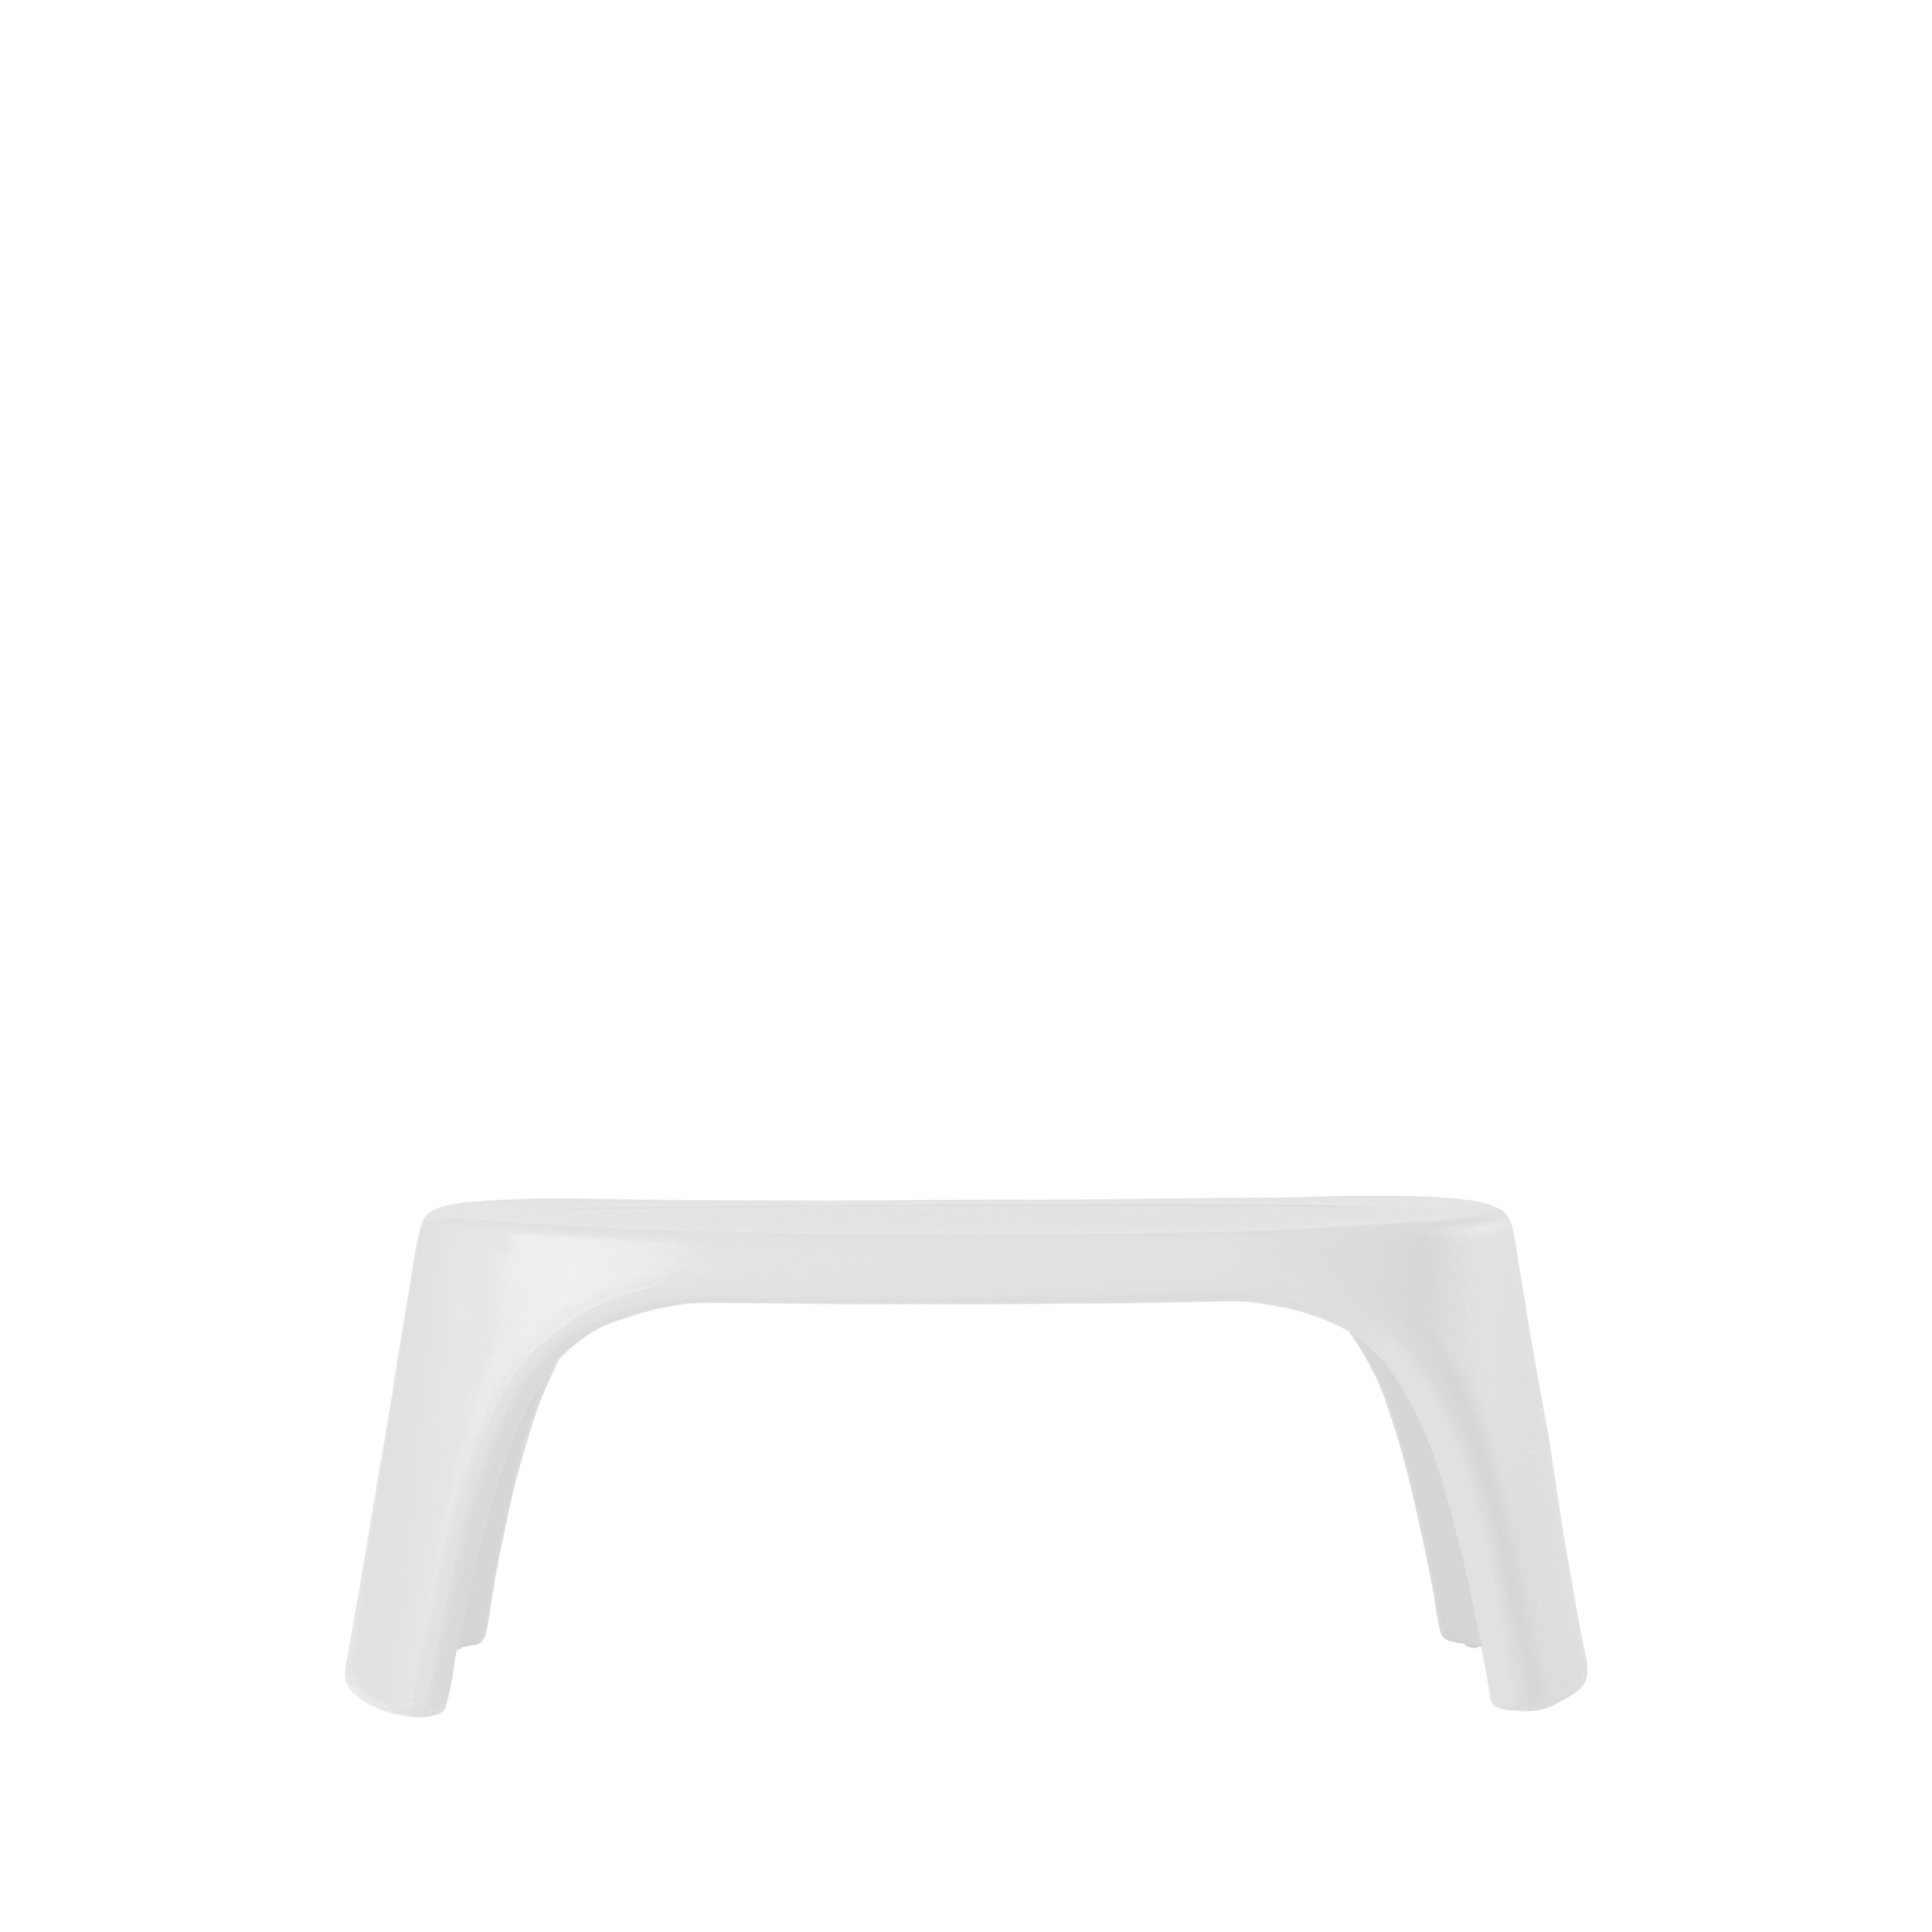 Other Powder Blue Amélie Panchetta Bench by Italo Pertichini For Sale